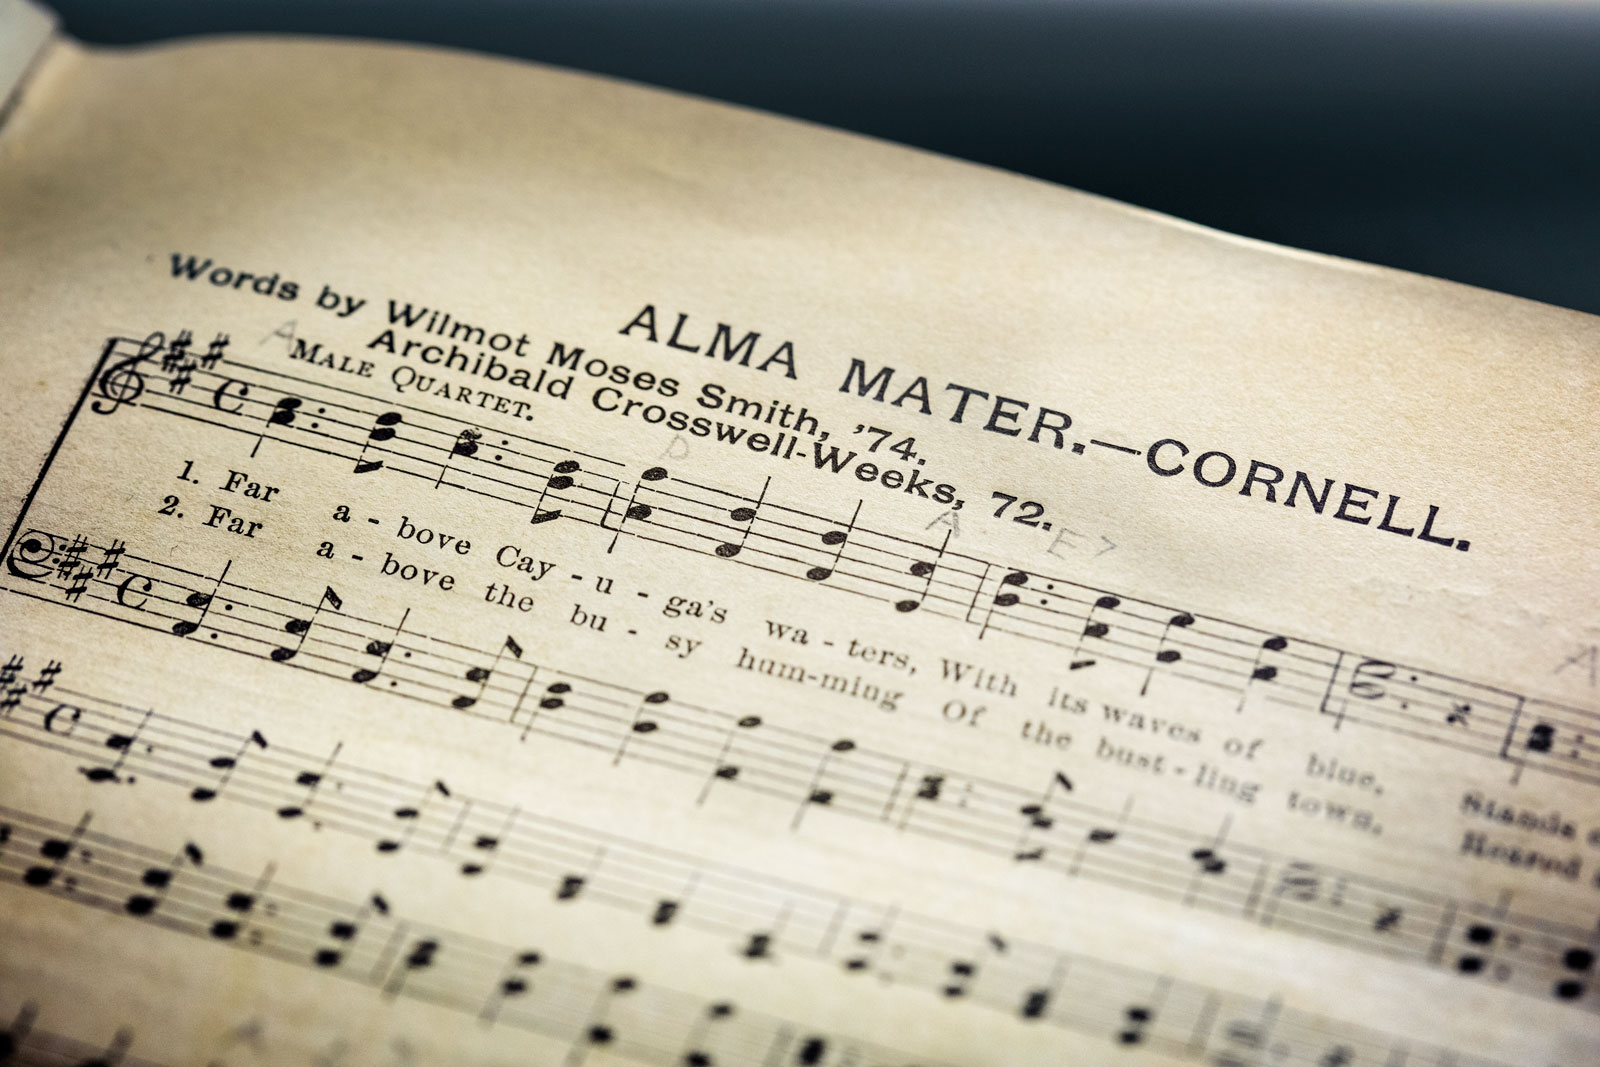 Top of the page of Cornell's "Alma Mater" sheet music